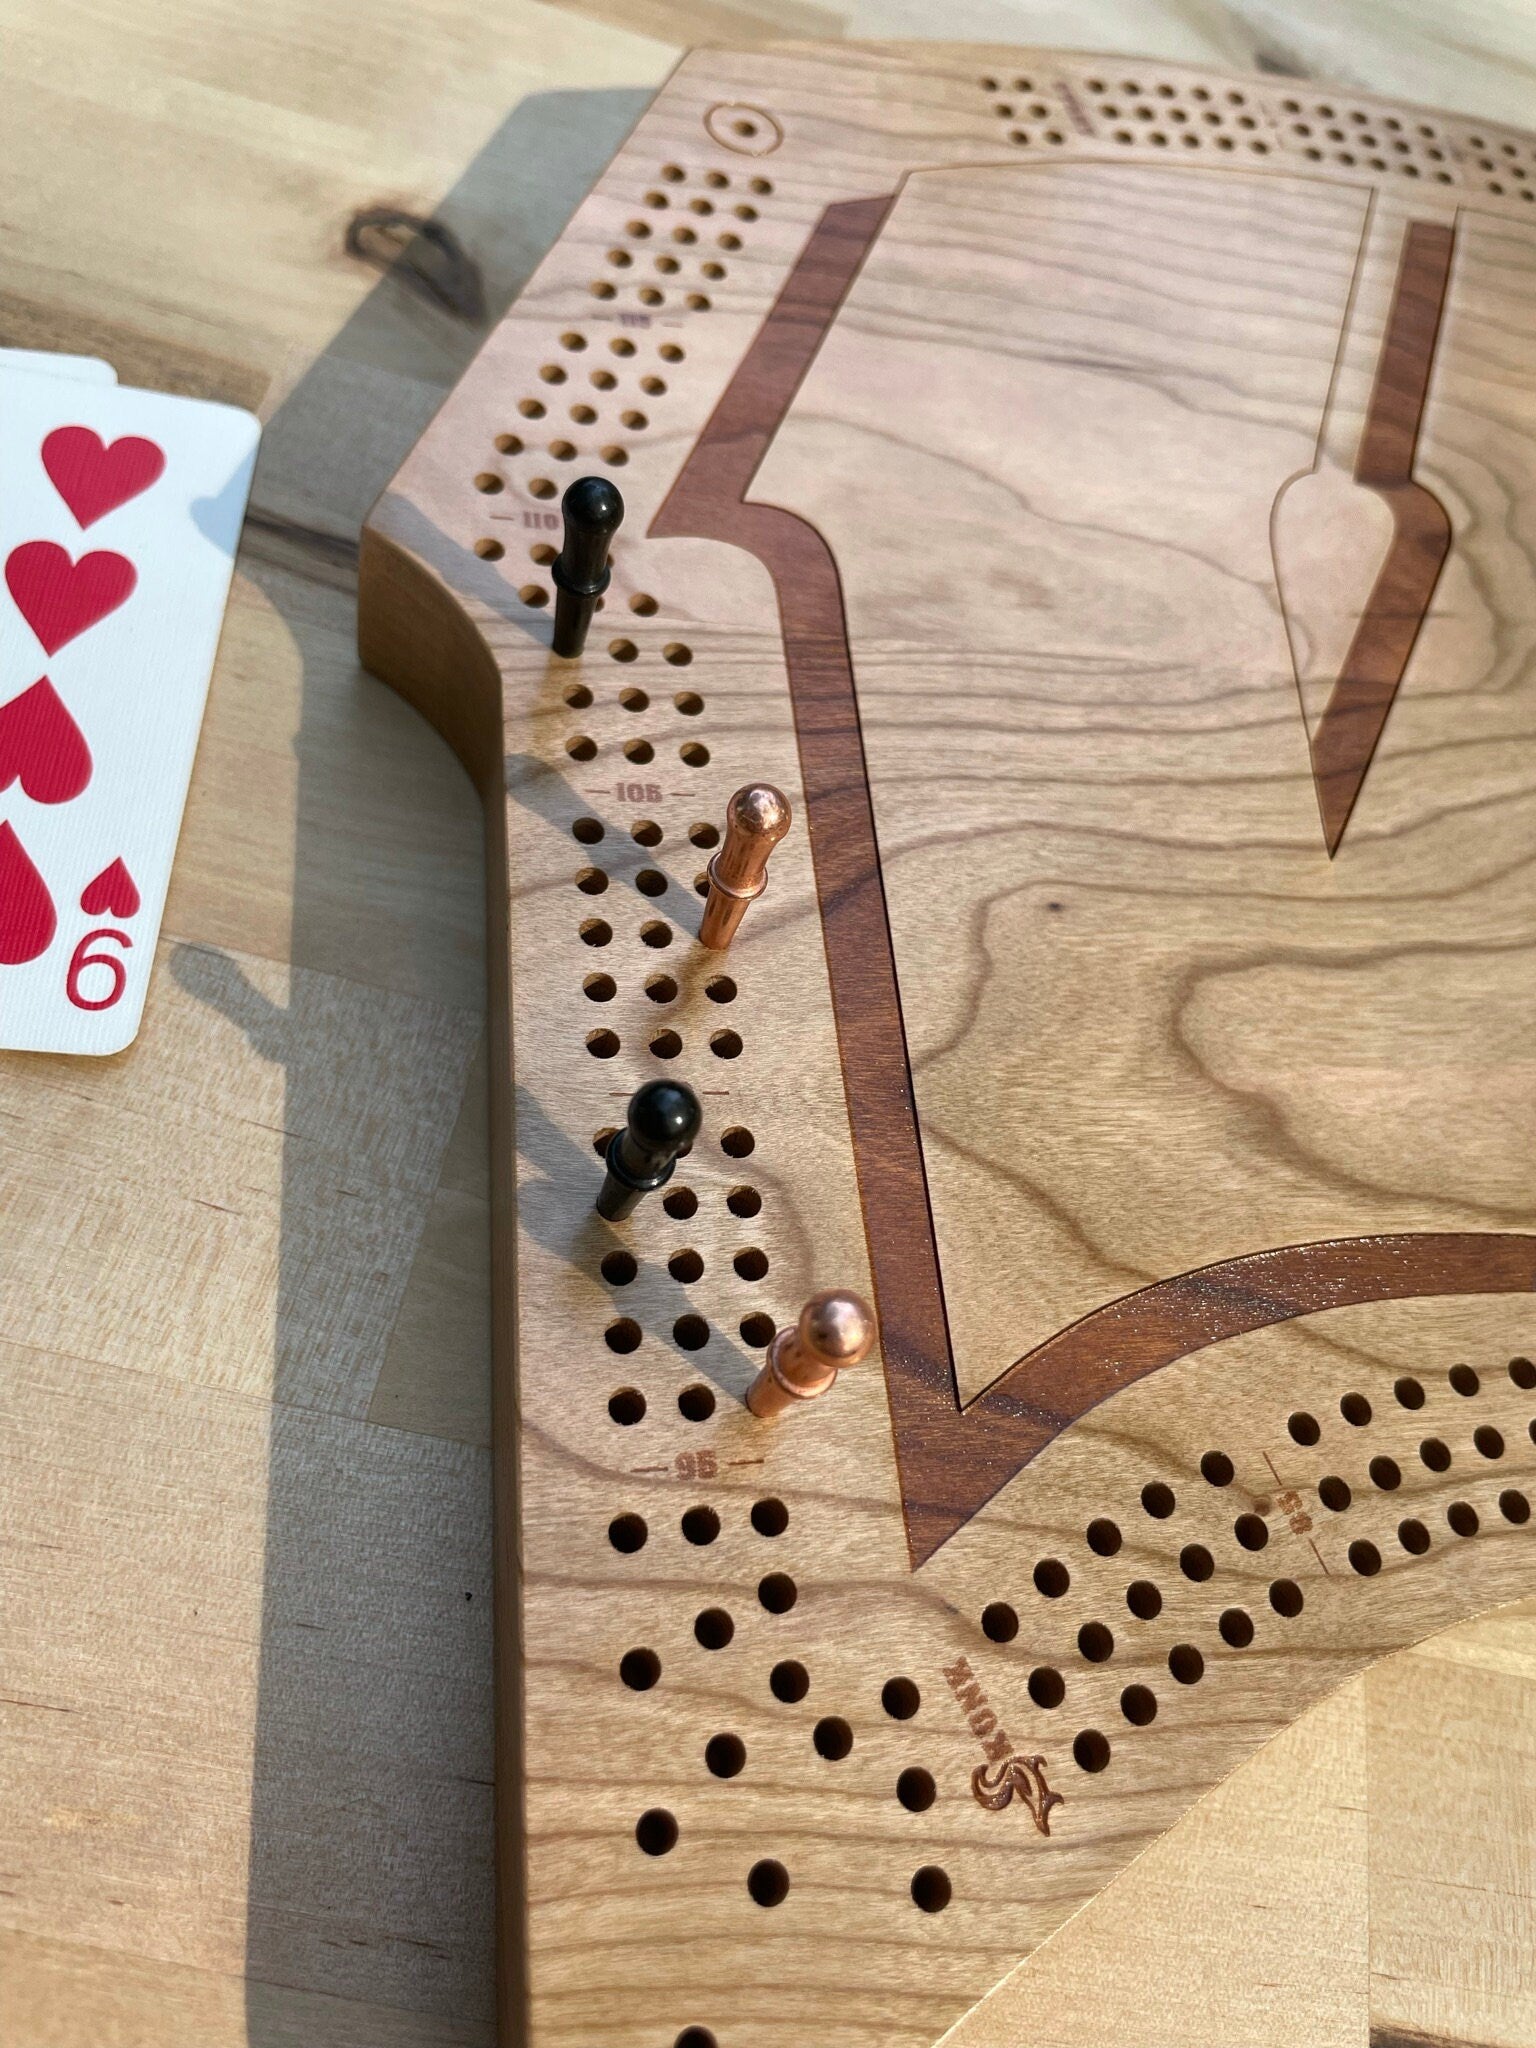 University of Wisconsin "Motion W" Cribbage Board & Wall Display